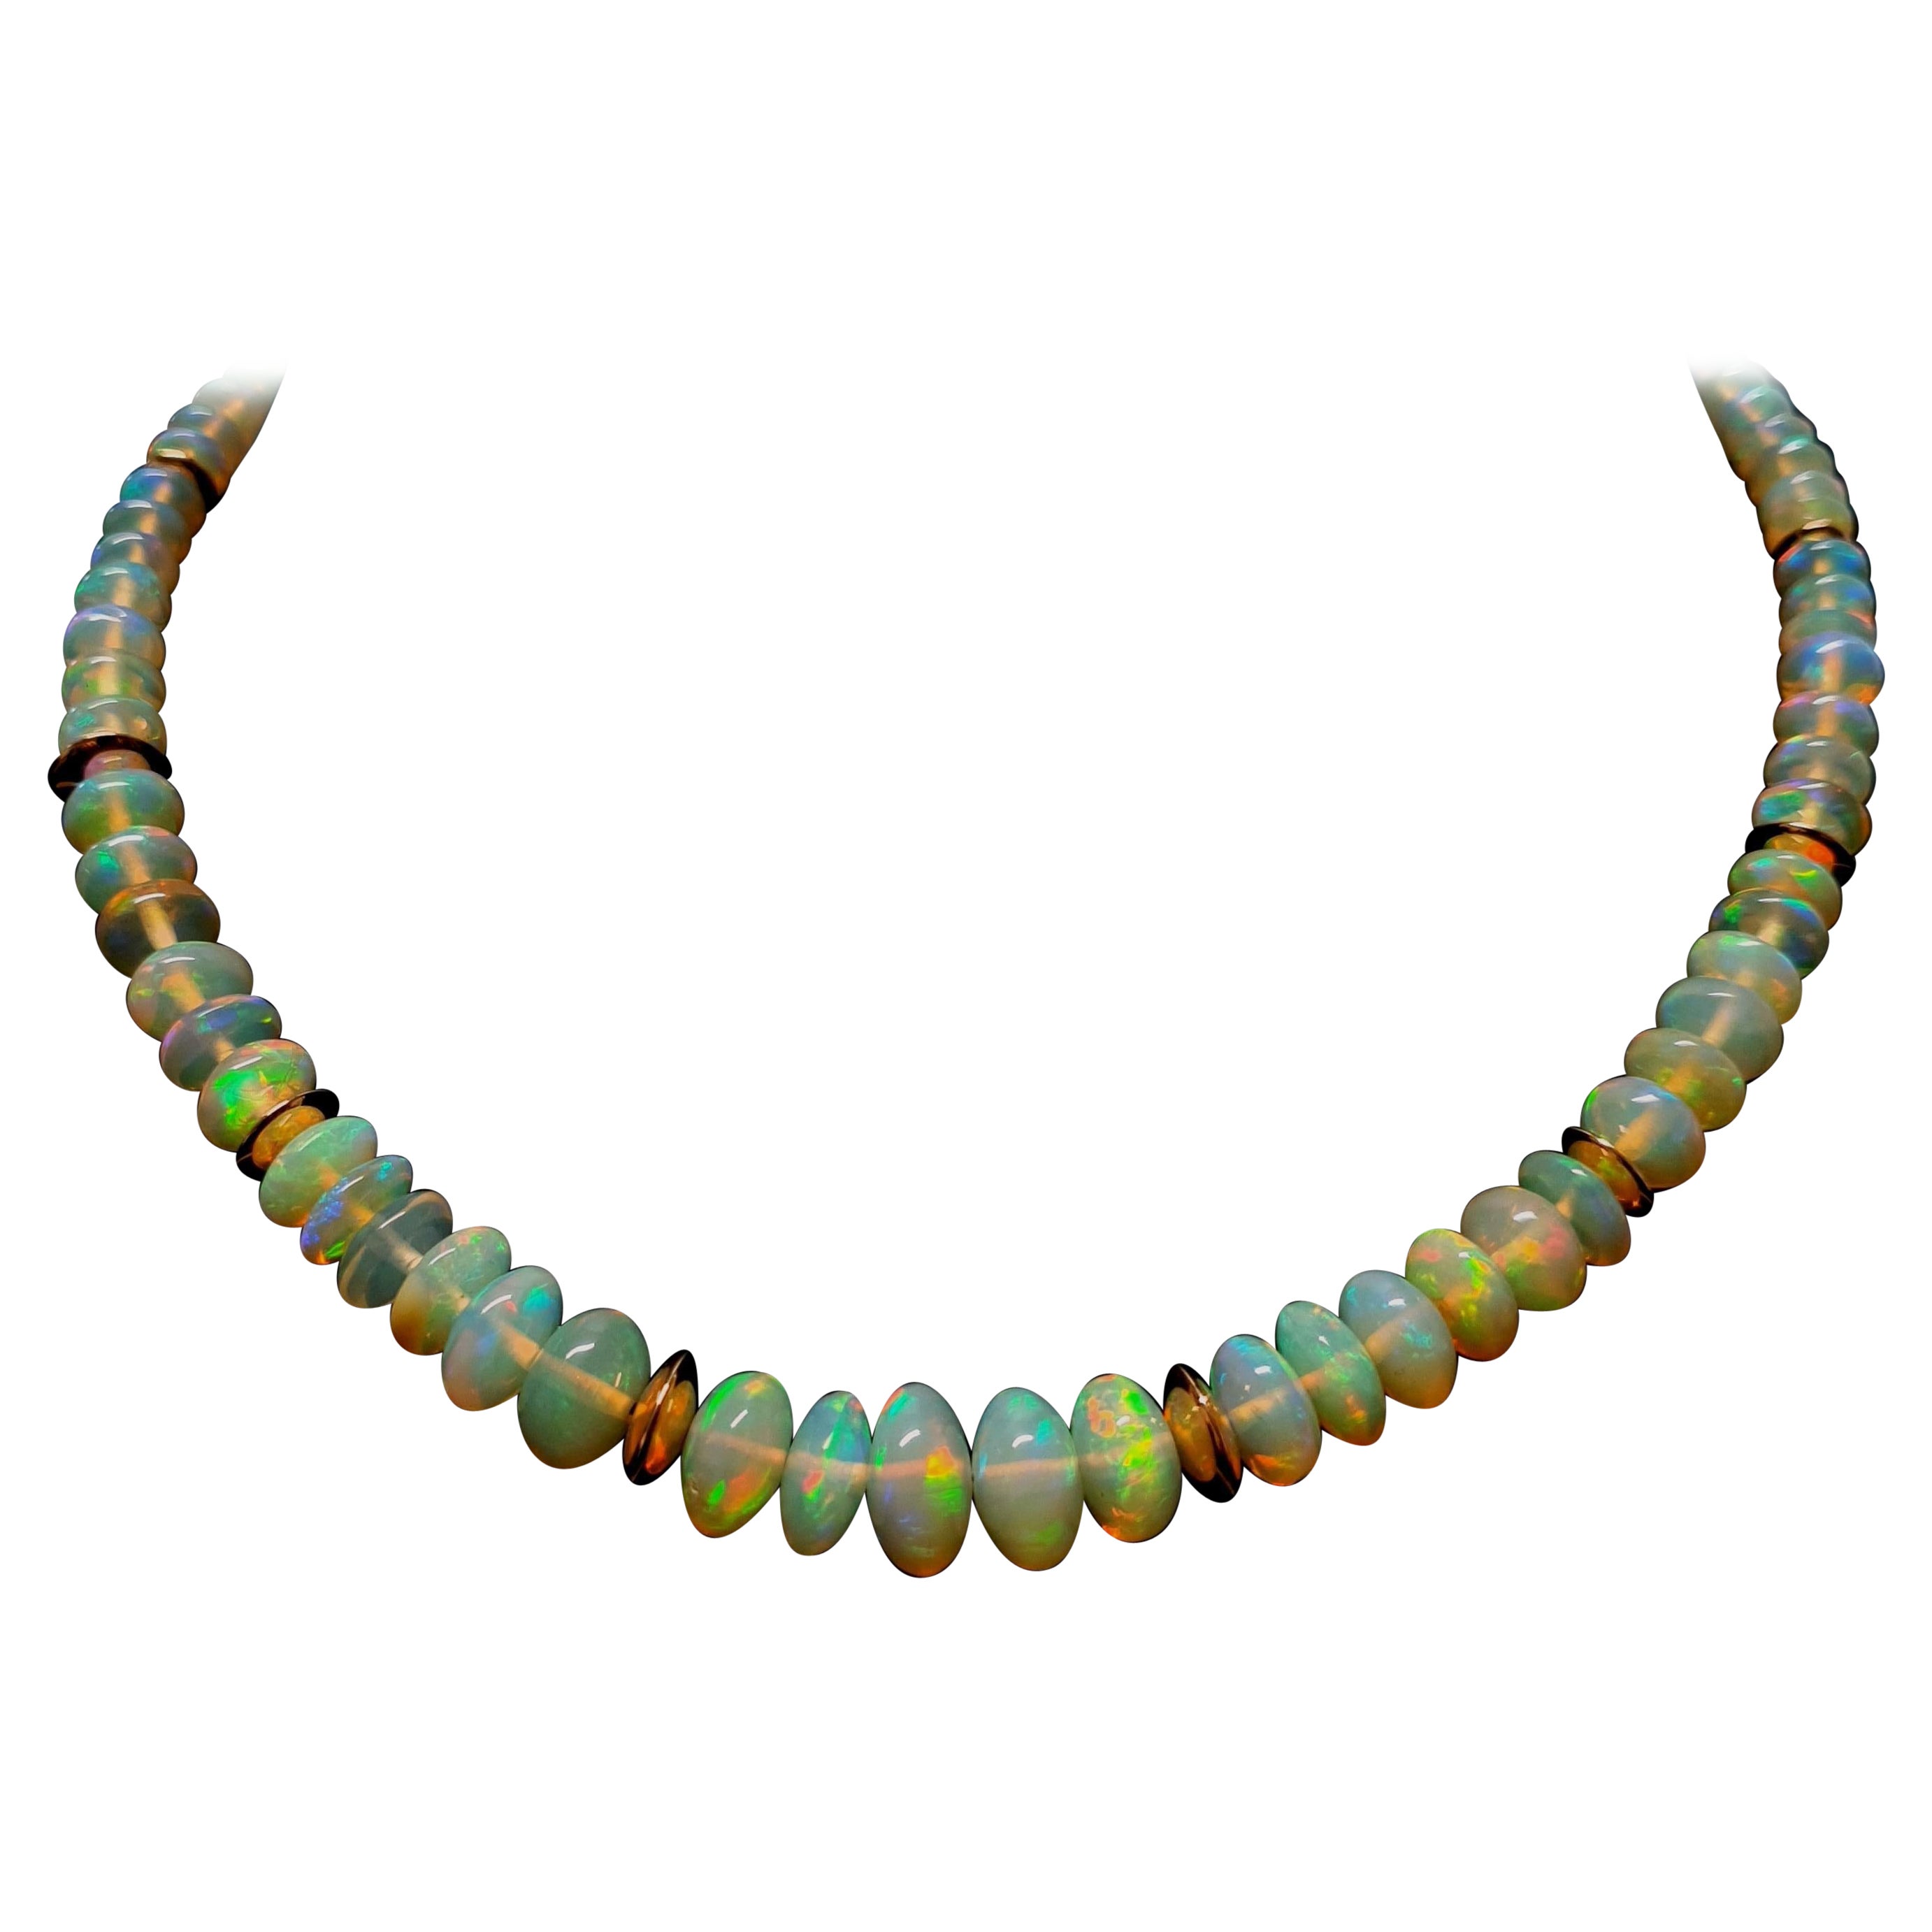 Crispy Sparkling Opal Rondel Beaded Necklace with 18 Carat Rose Gold, Greenish